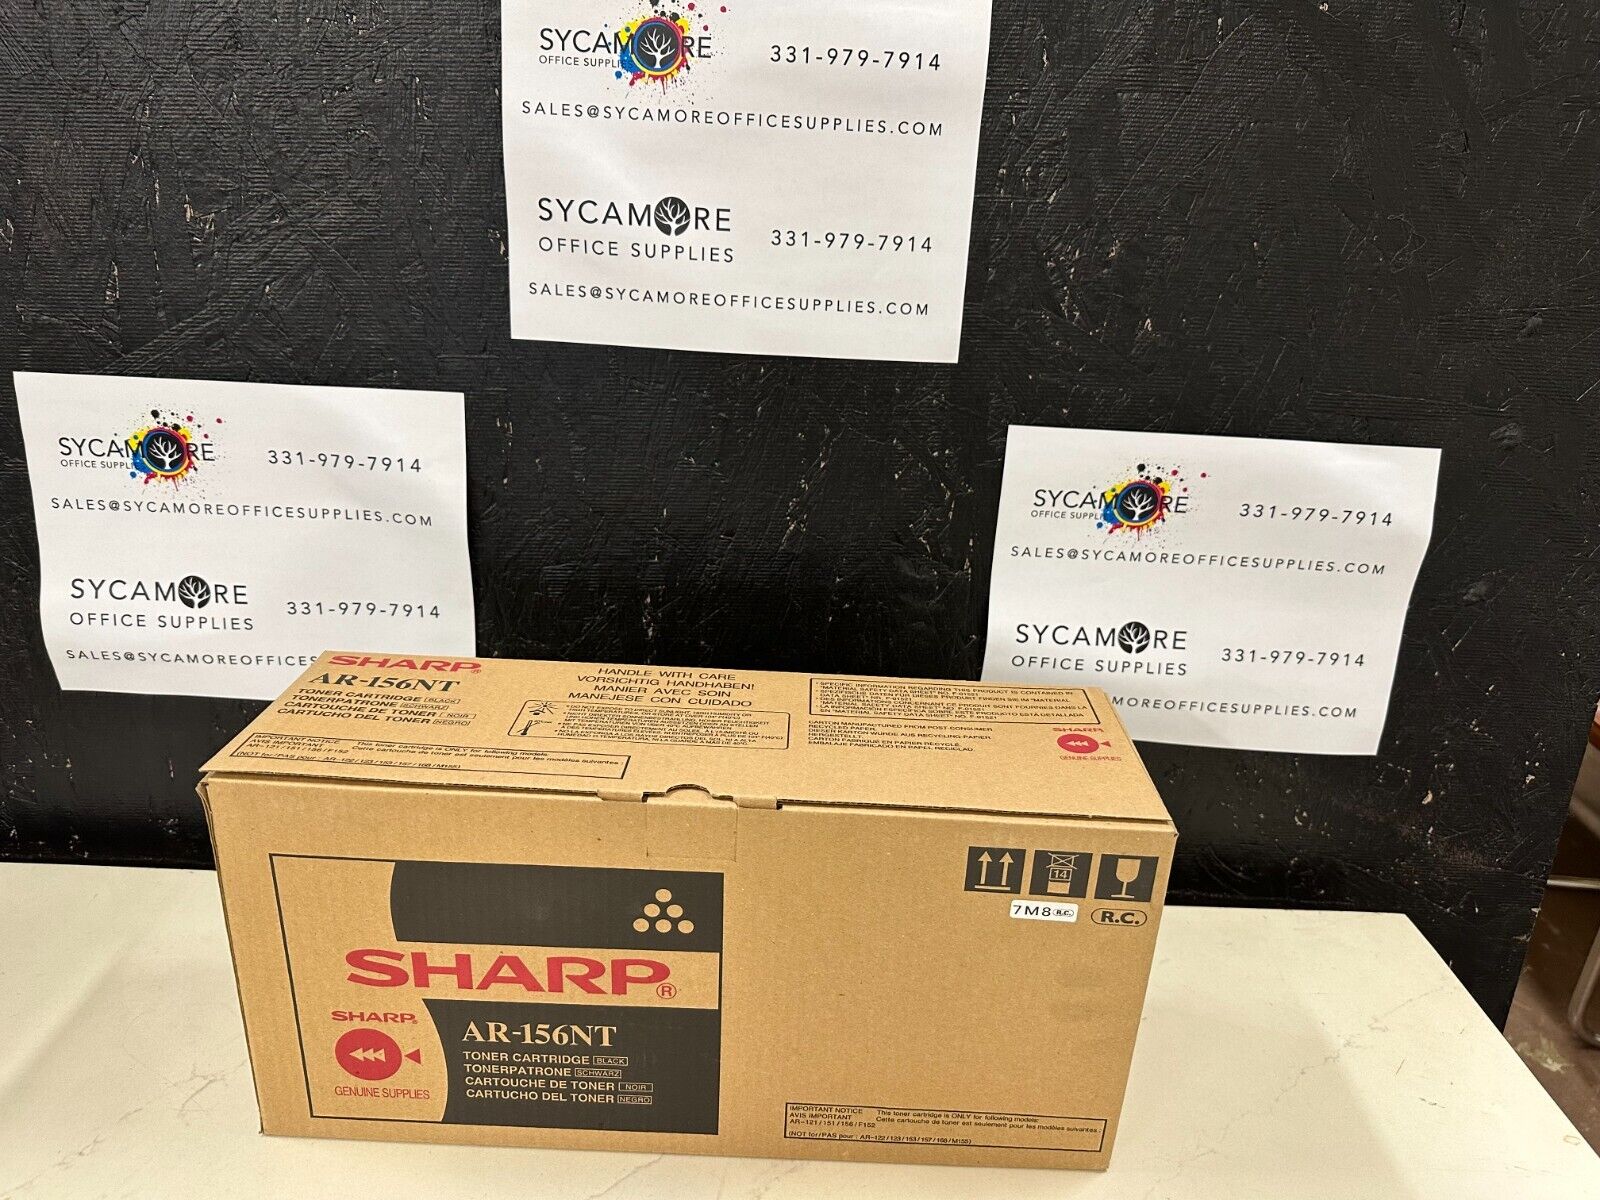 SHARP AR-156NT TONER CTG BLACK GENUINE RATED AT 6,500 PAGES